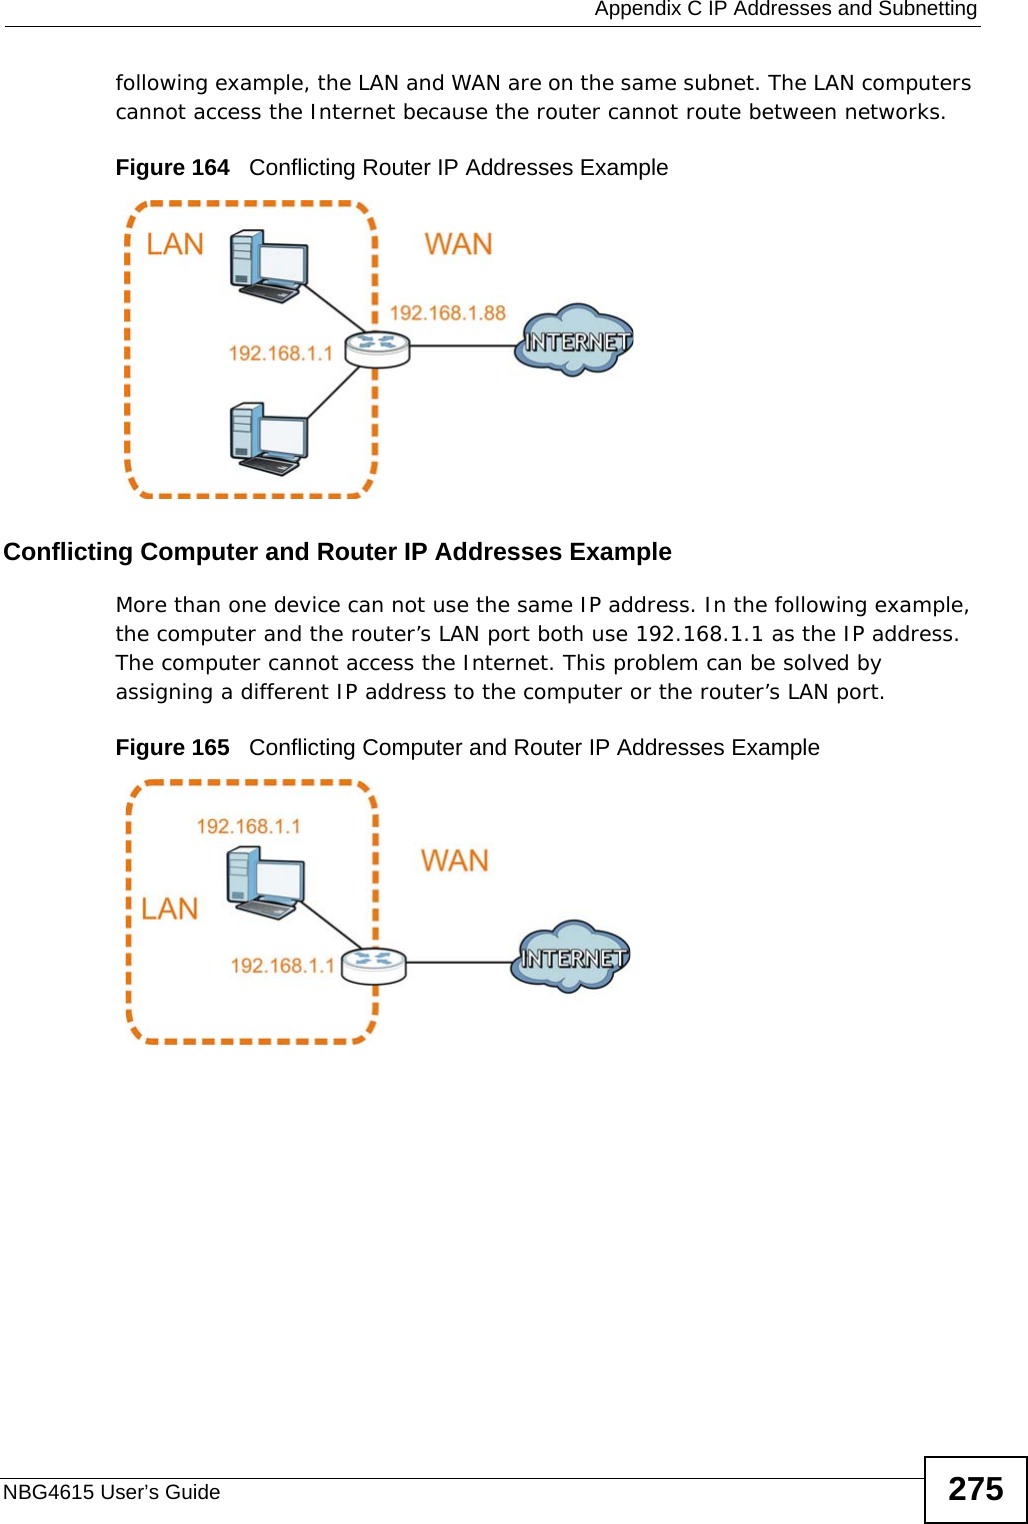  Appendix C IP Addresses and SubnettingNBG4615 User’s Guide 275following example, the LAN and WAN are on the same subnet. The LAN computers cannot access the Internet because the router cannot route between networks.Figure 164   Conflicting Router IP Addresses ExampleConflicting Computer and Router IP Addresses ExampleMore than one device can not use the same IP address. In the following example, the computer and the router’s LAN port both use 192.168.1.1 as the IP address. The computer cannot access the Internet. This problem can be solved by assigning a different IP address to the computer or the router’s LAN port.  Figure 165   Conflicting Computer and Router IP Addresses Example